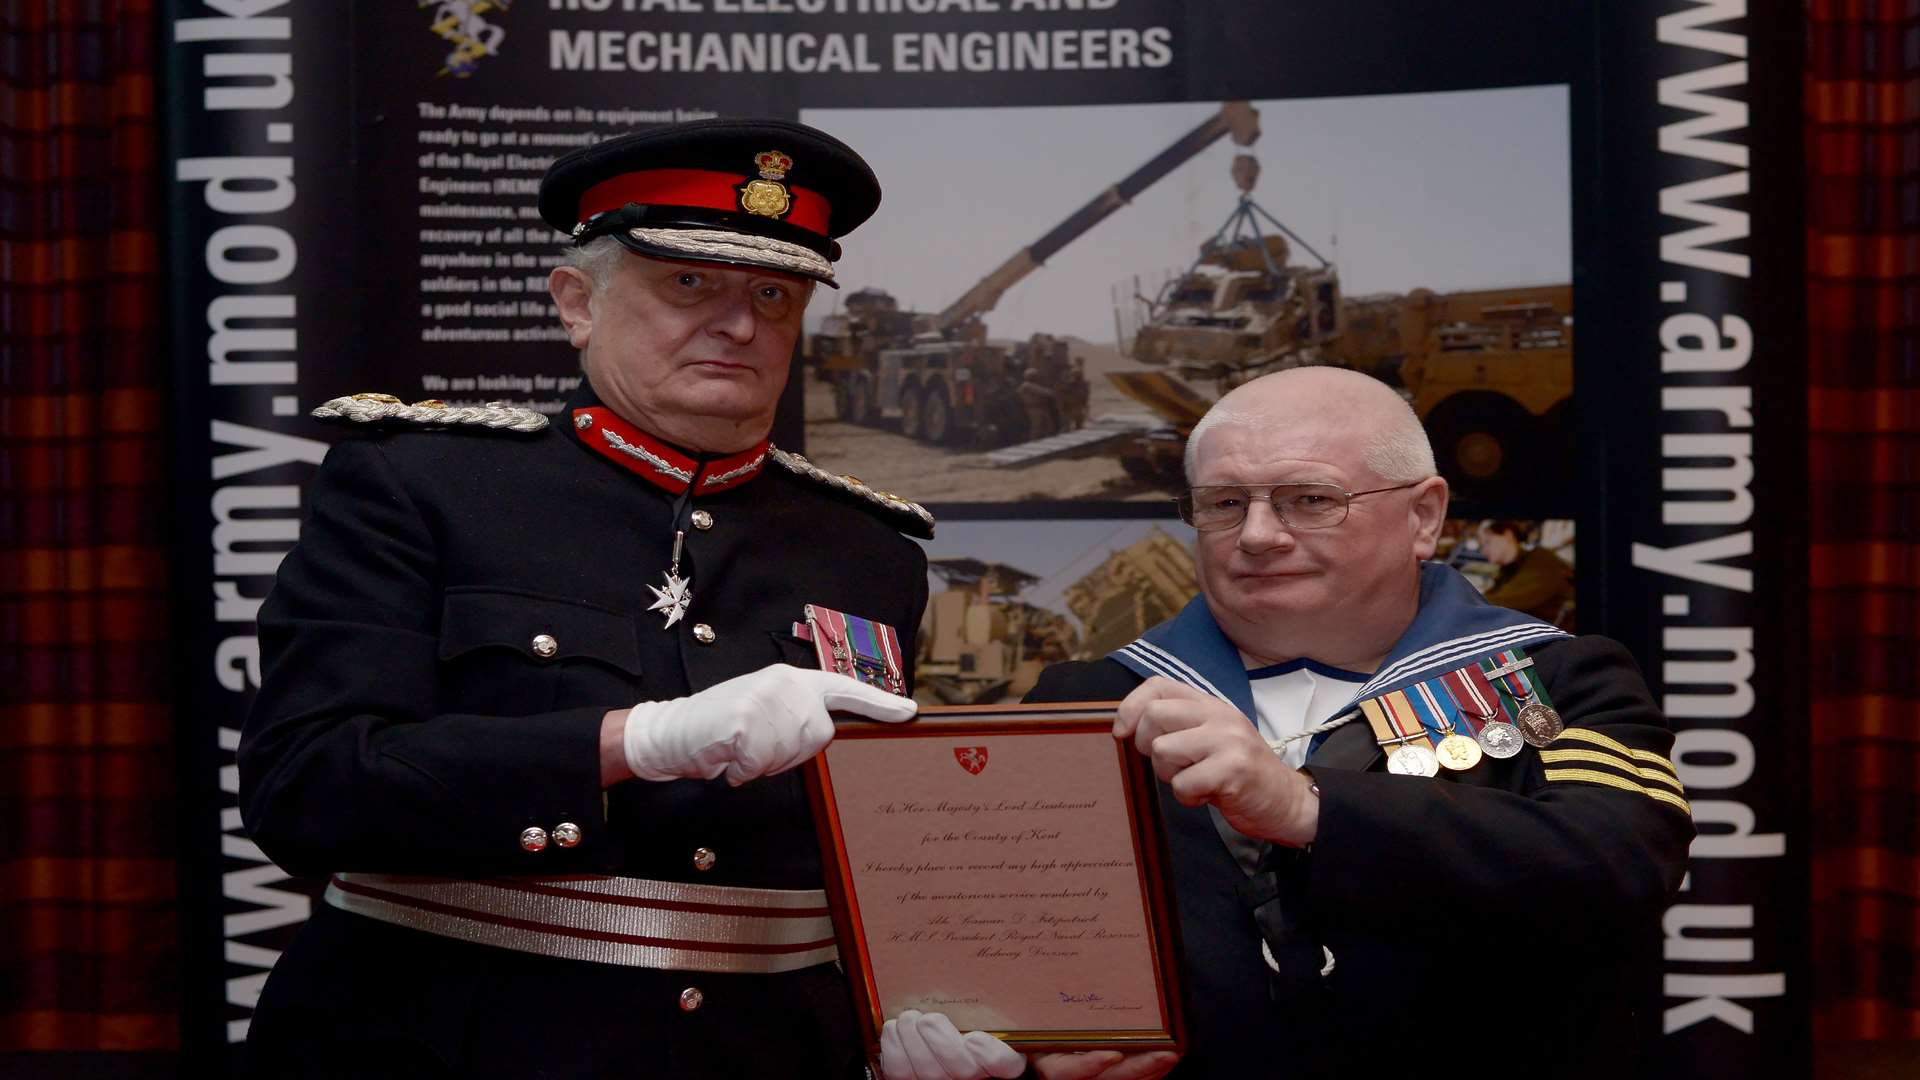 The Lord-Lieutenant of Kent, Viscount De L’Isle MBE presents Able Seaman David Fitzpatrick with a Certificate for Meritorious Service in recognition of his outstanding loyalty and commitment to the Reserve Forces.